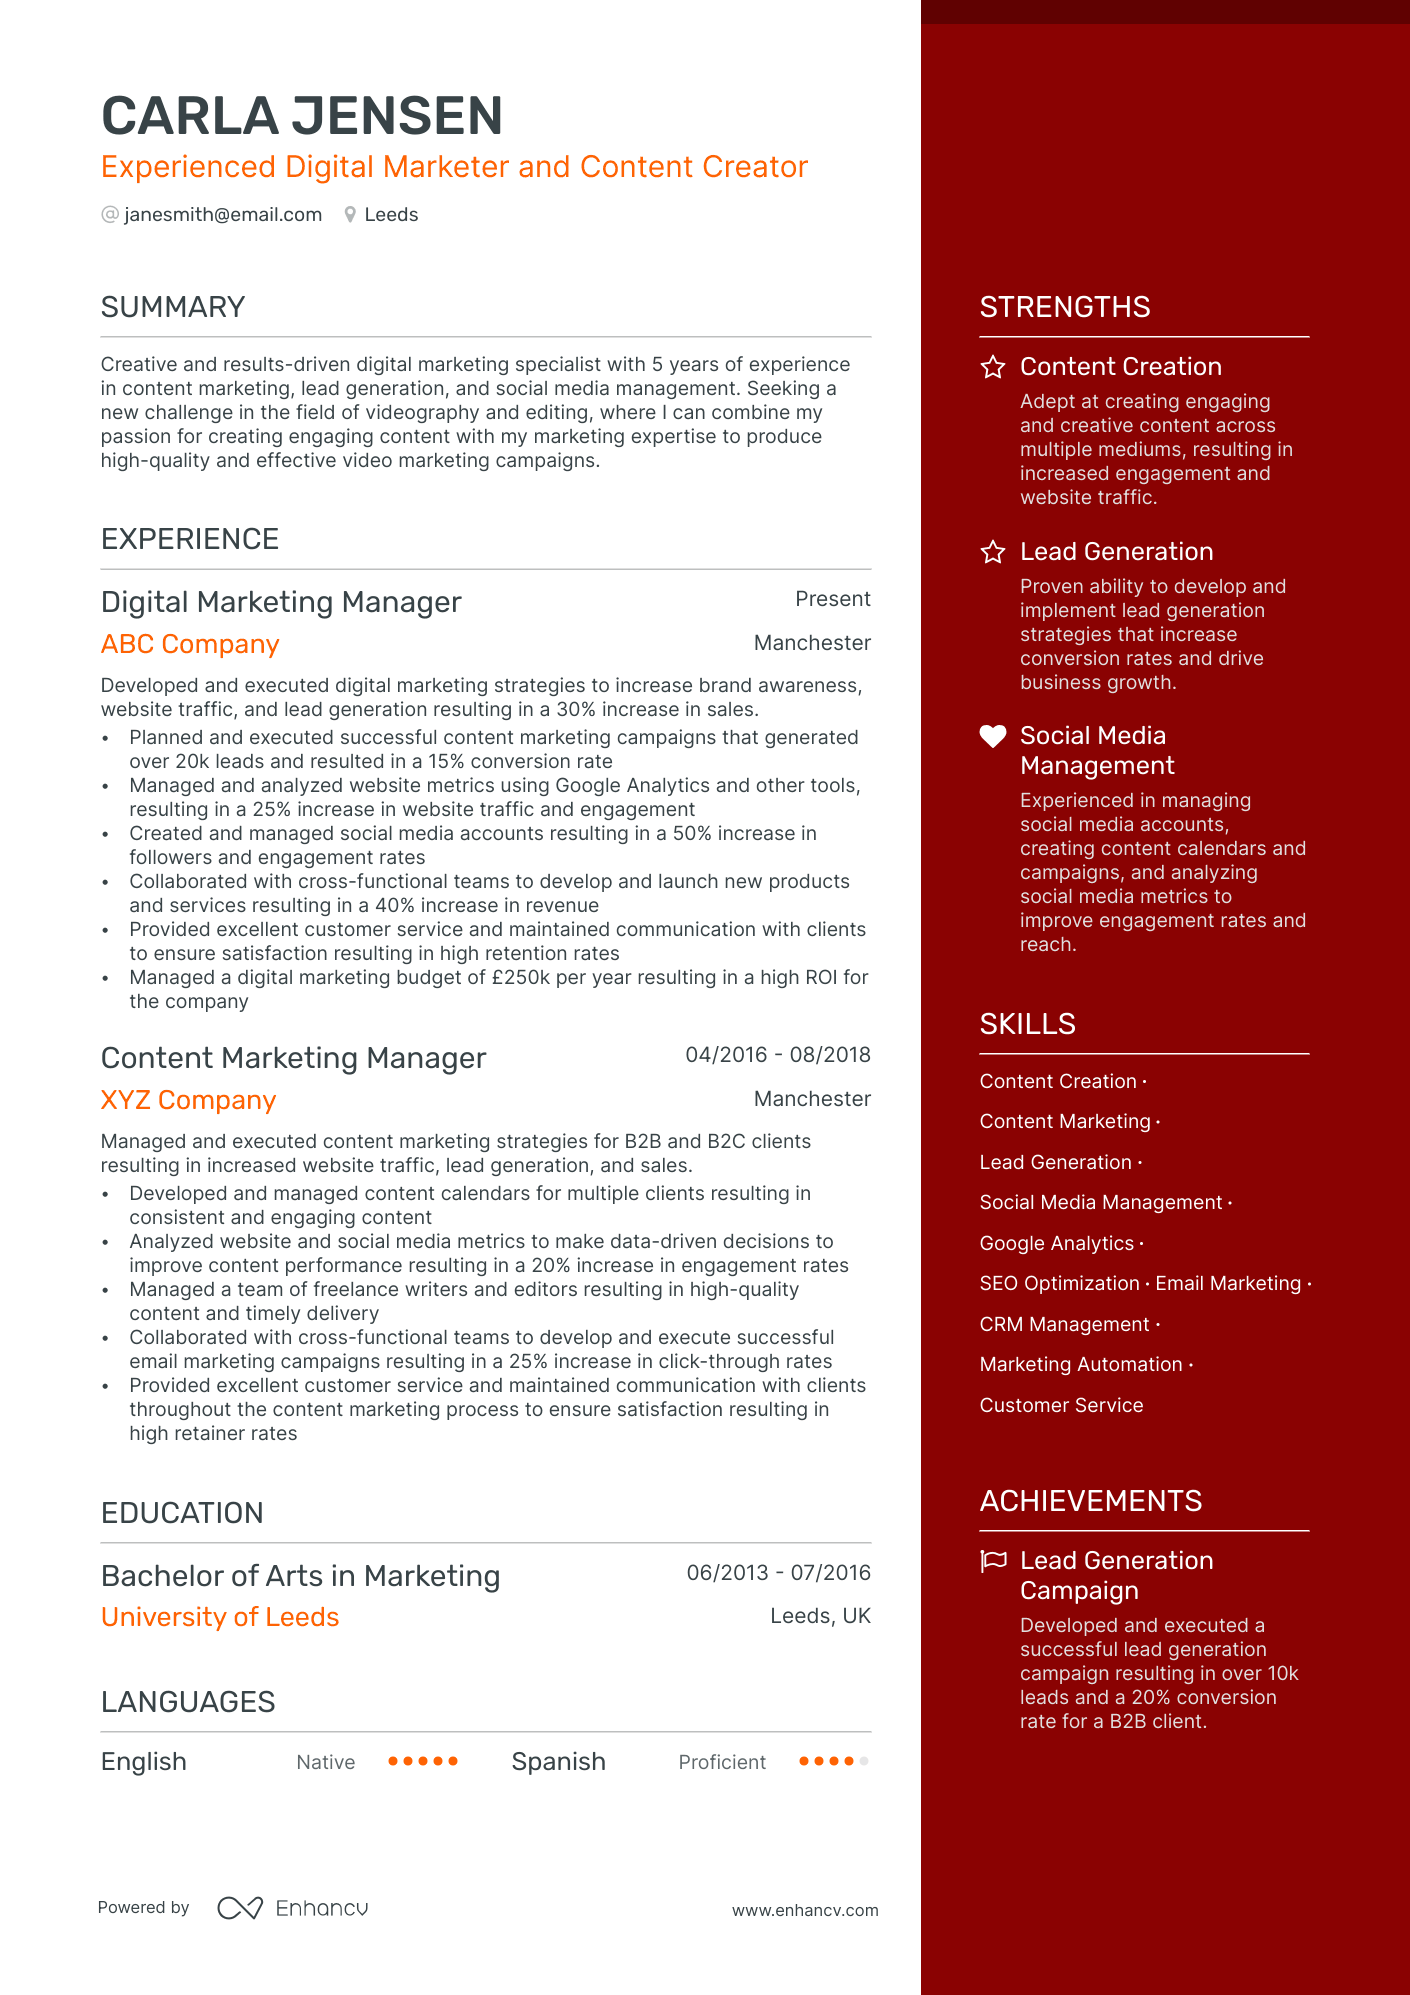 Experienced Digital Marketer and Content Creator CV example